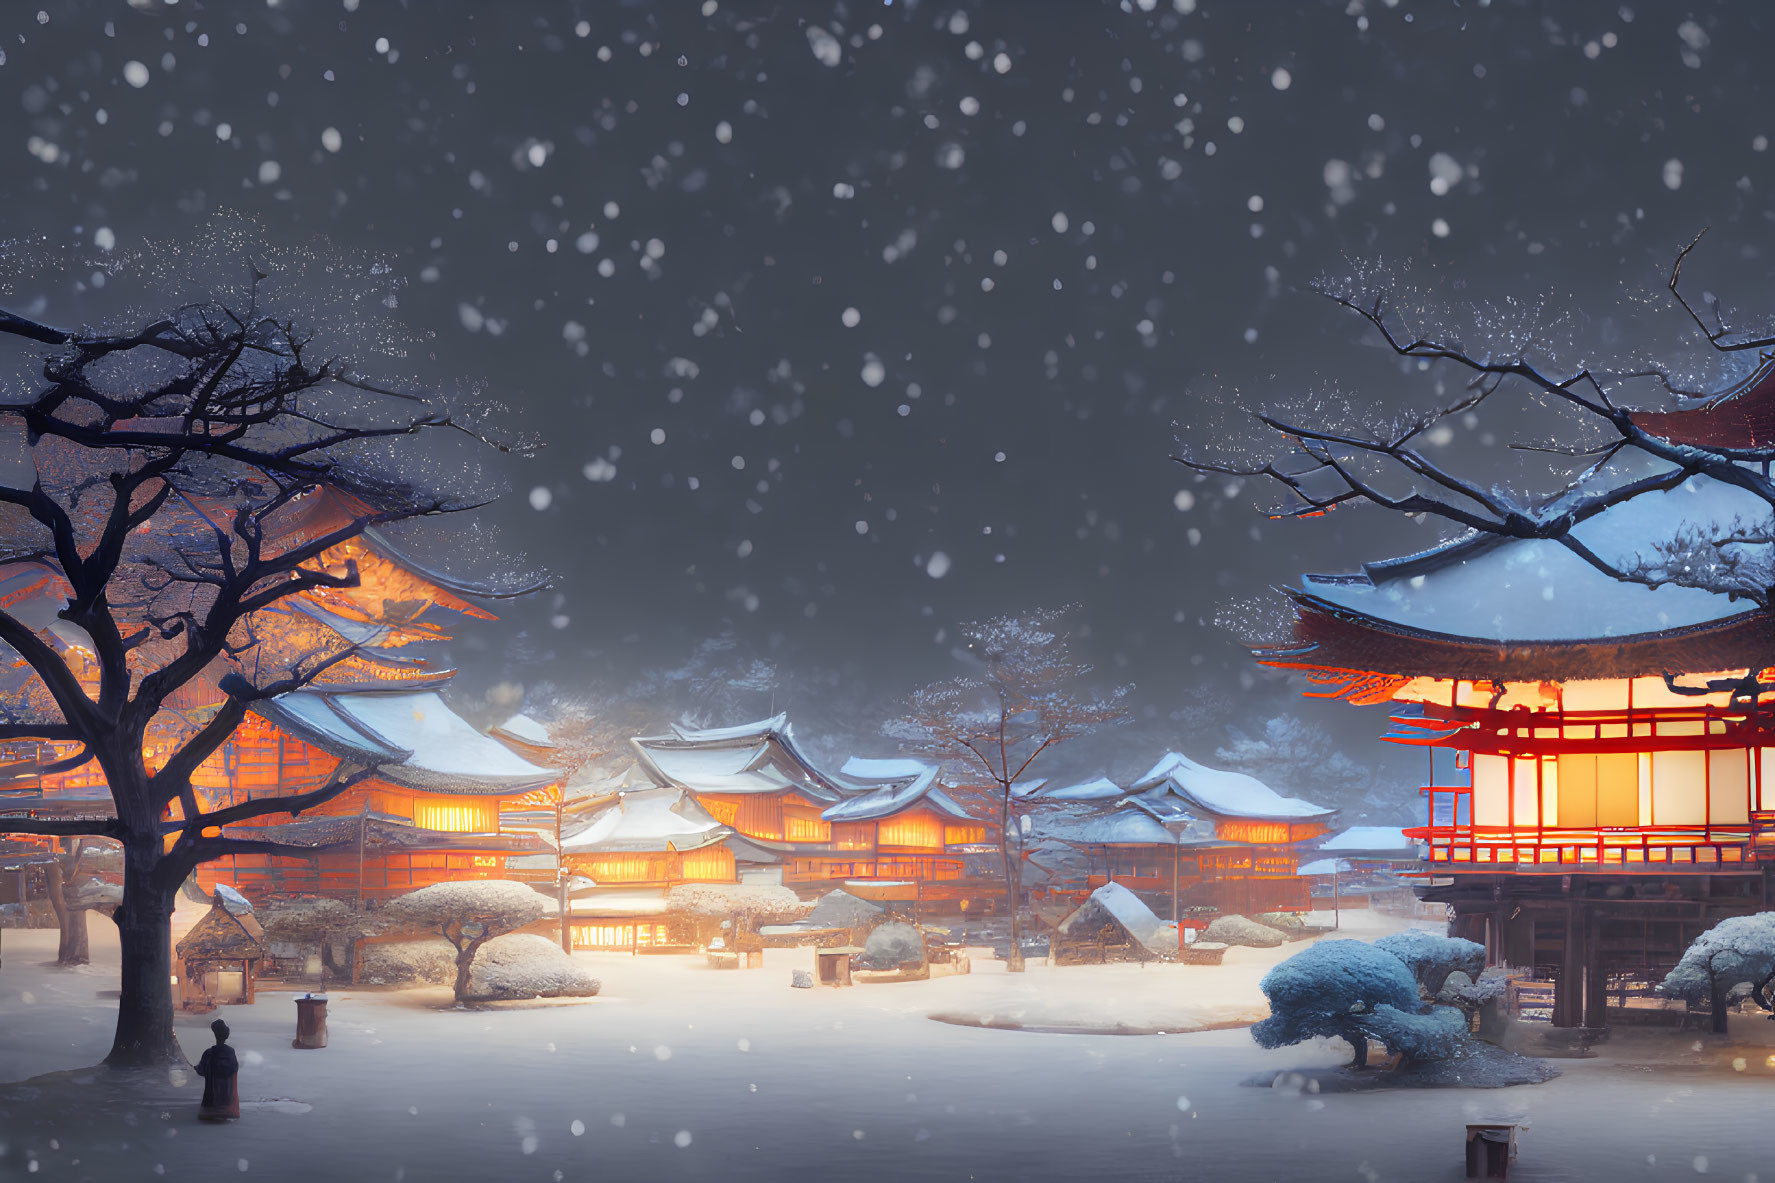 Traditional Japanese architecture in serene snowy scene at dusk